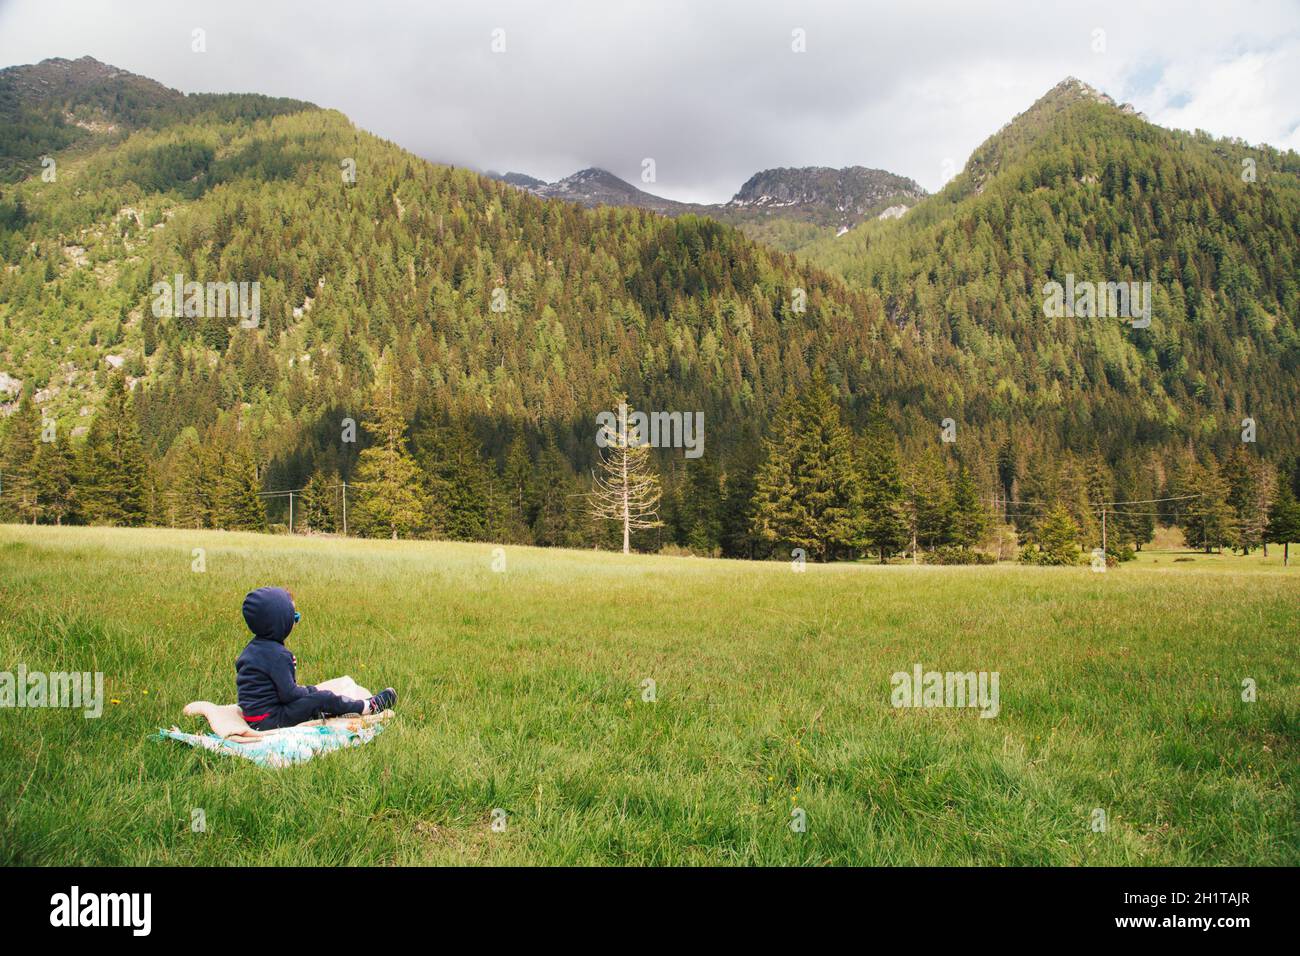 Family picnic in middle of nature. Wide-open spaces. Gaver locality, Valle Sabbia, Lombardy region in Italy. Concept of vacation in high mountains. Se Stock Photo